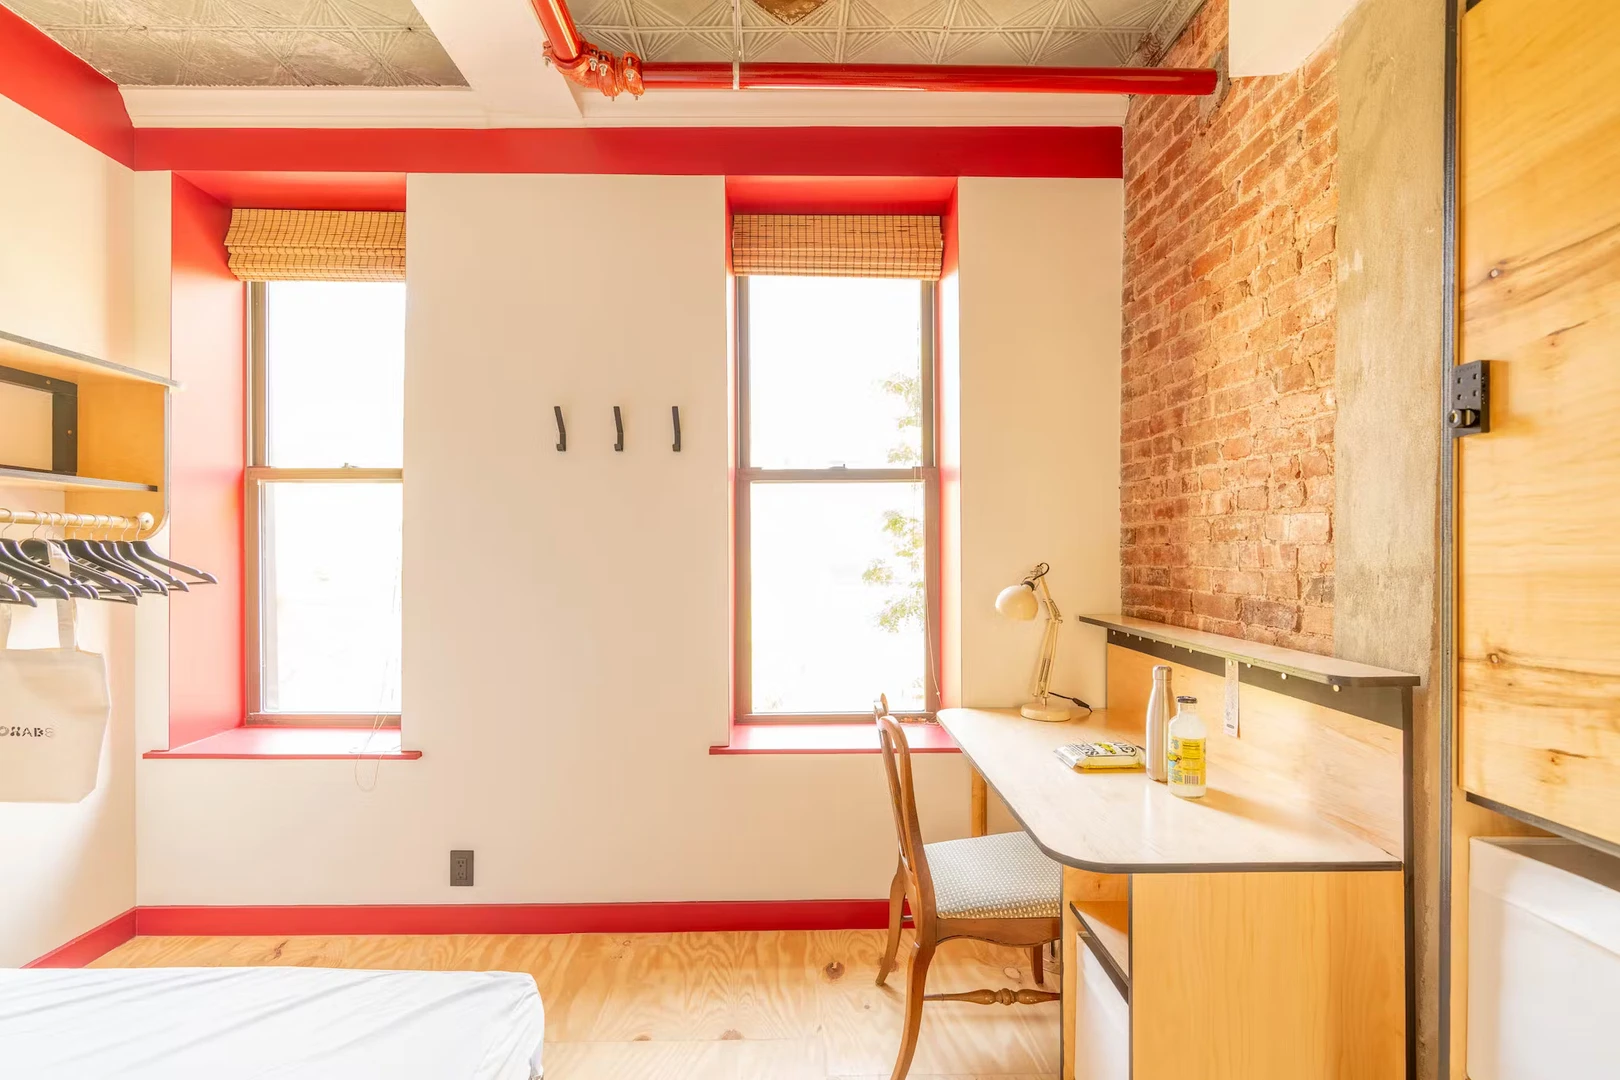 Renting rooms by the month in New York